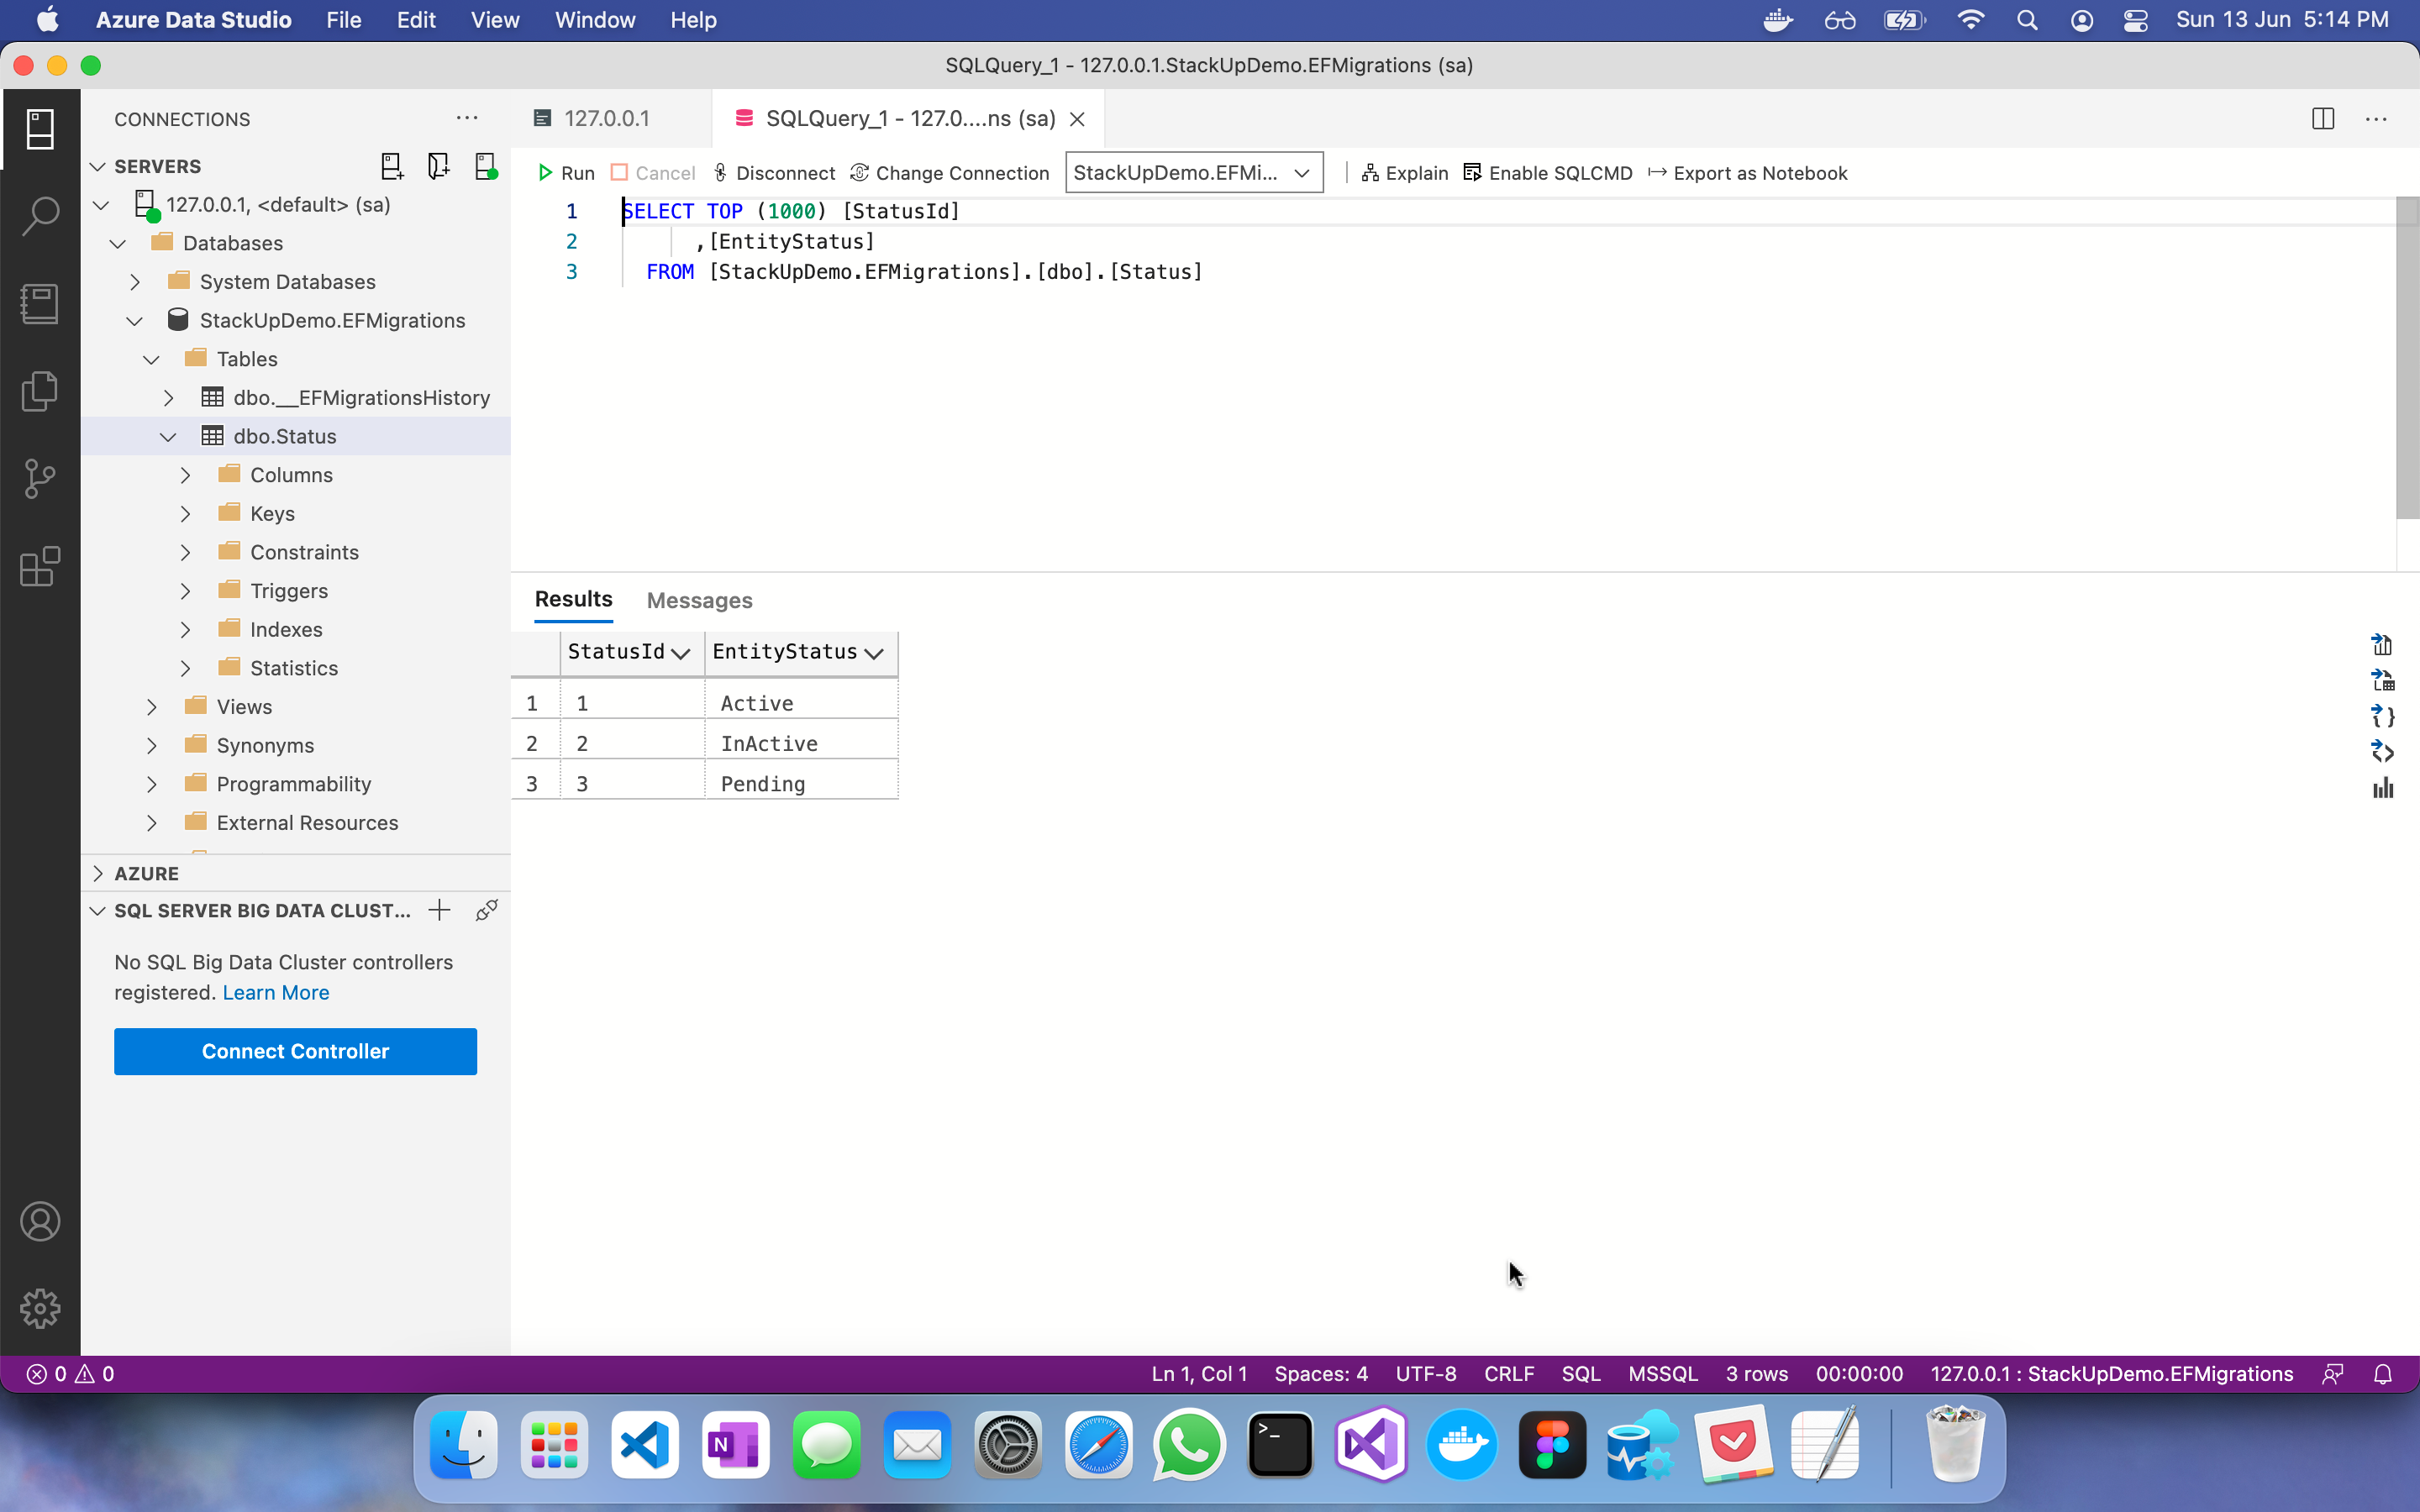 visual studio for mac database project